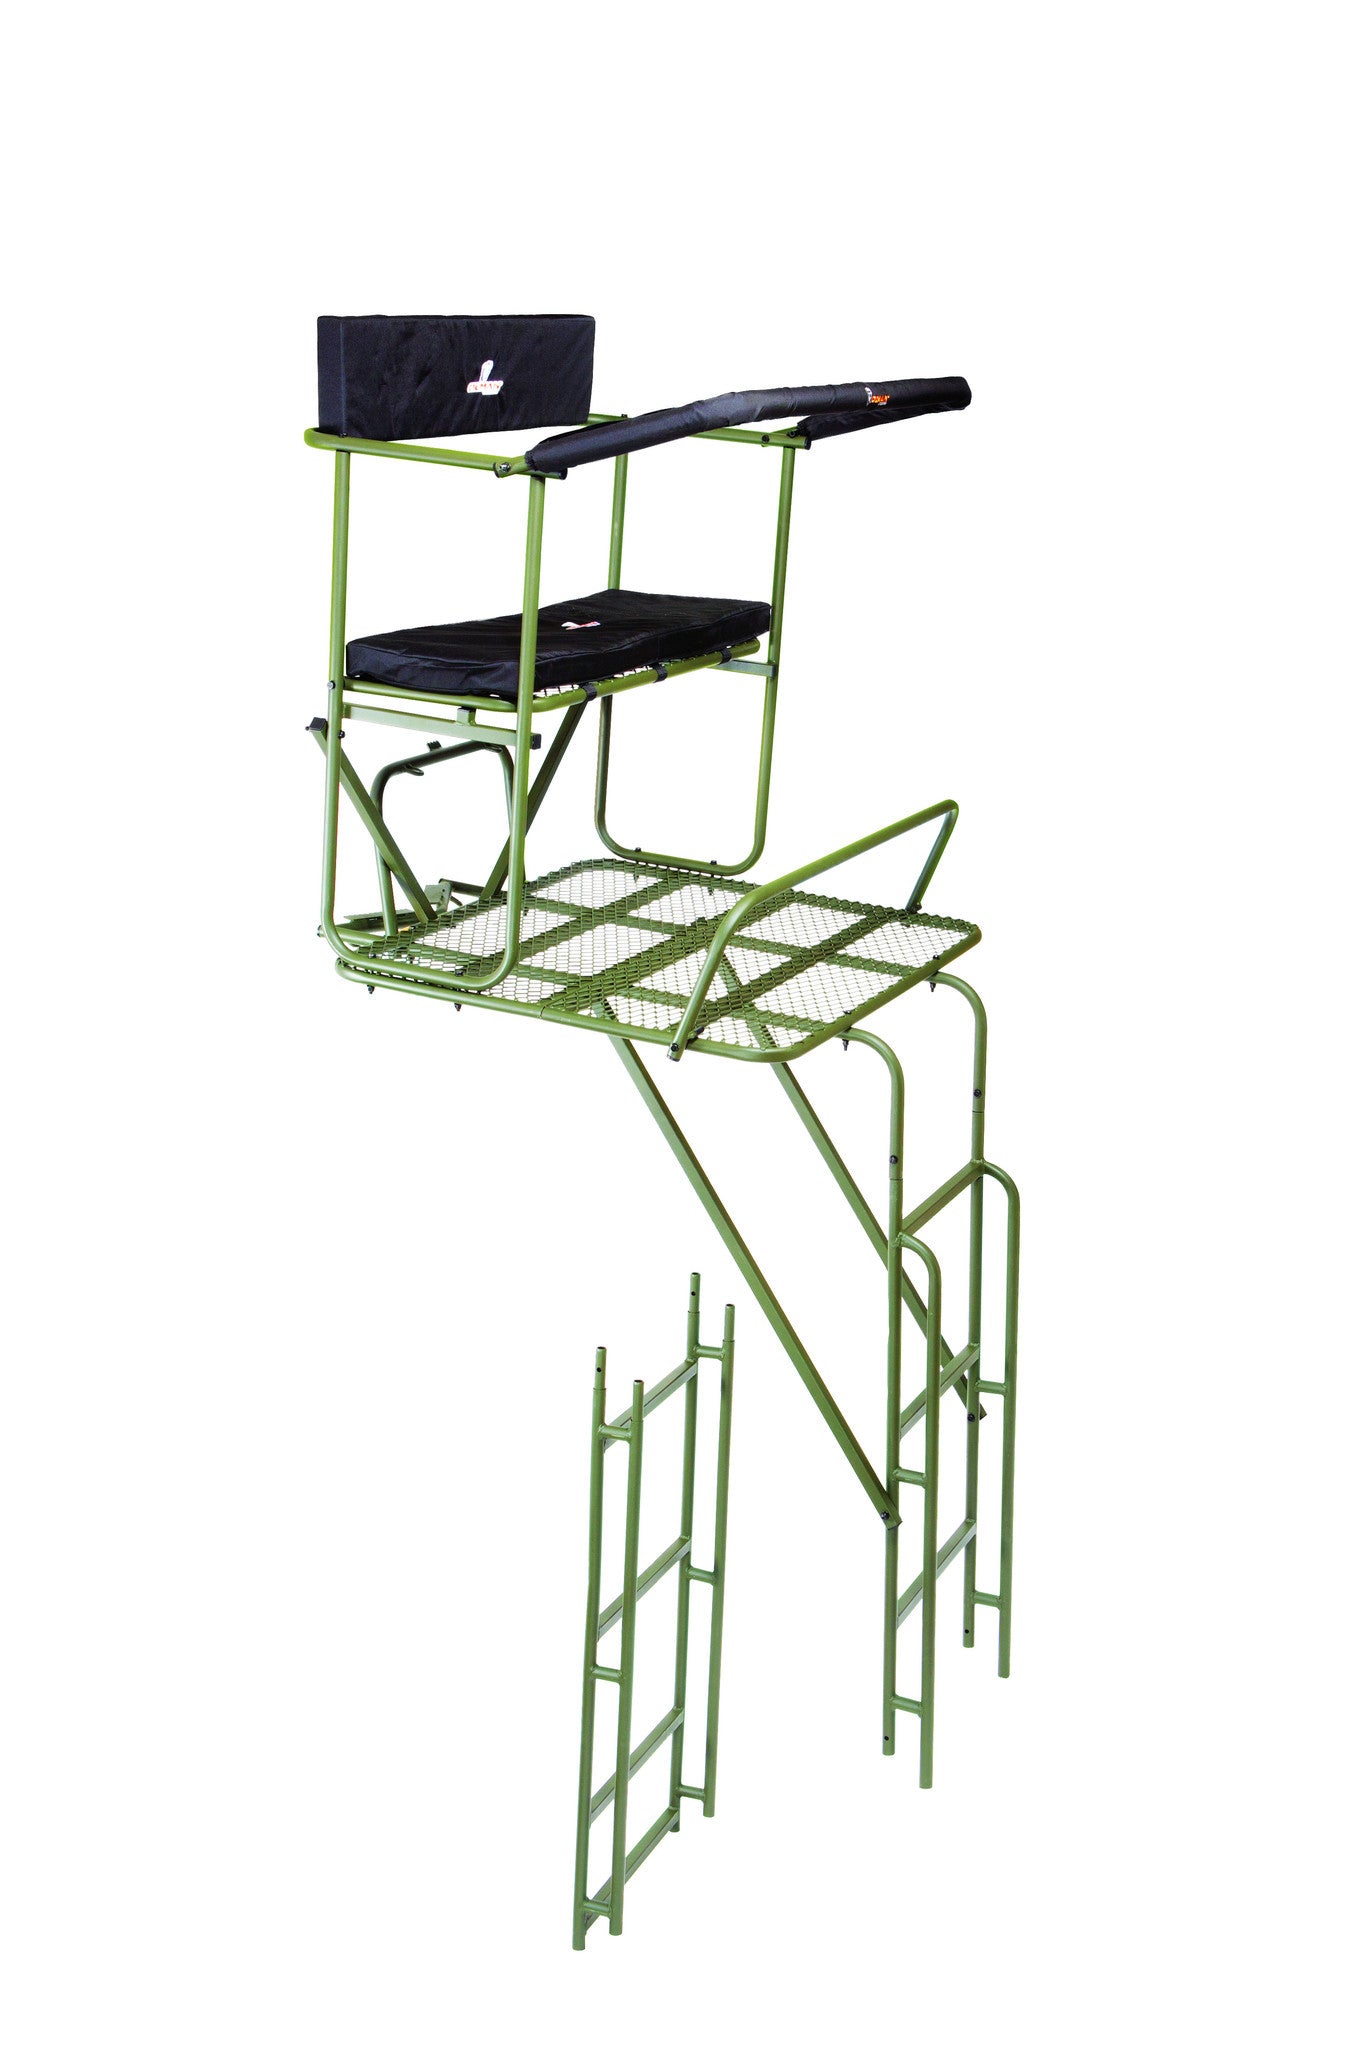 Ol Man Outdoors 16 ft Big Buddy Deluxe Ladder Tree stand